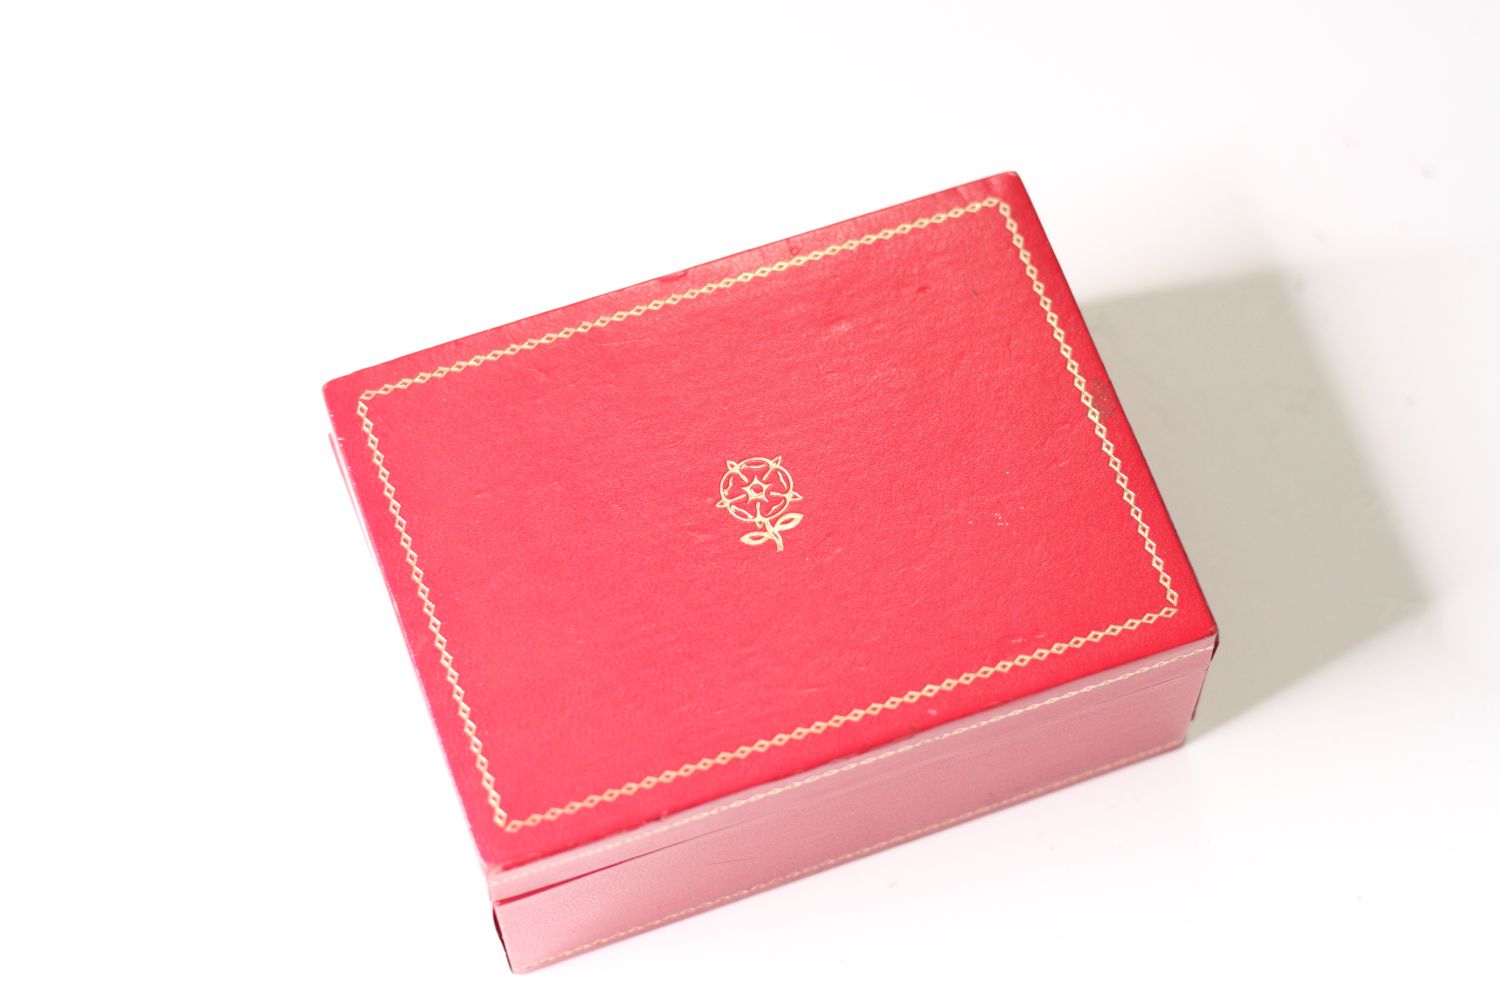 Vintage Tudor Box with Red Insert, Tudor Rose to top with gilt detail, approximately 12.5x9x5.5cm